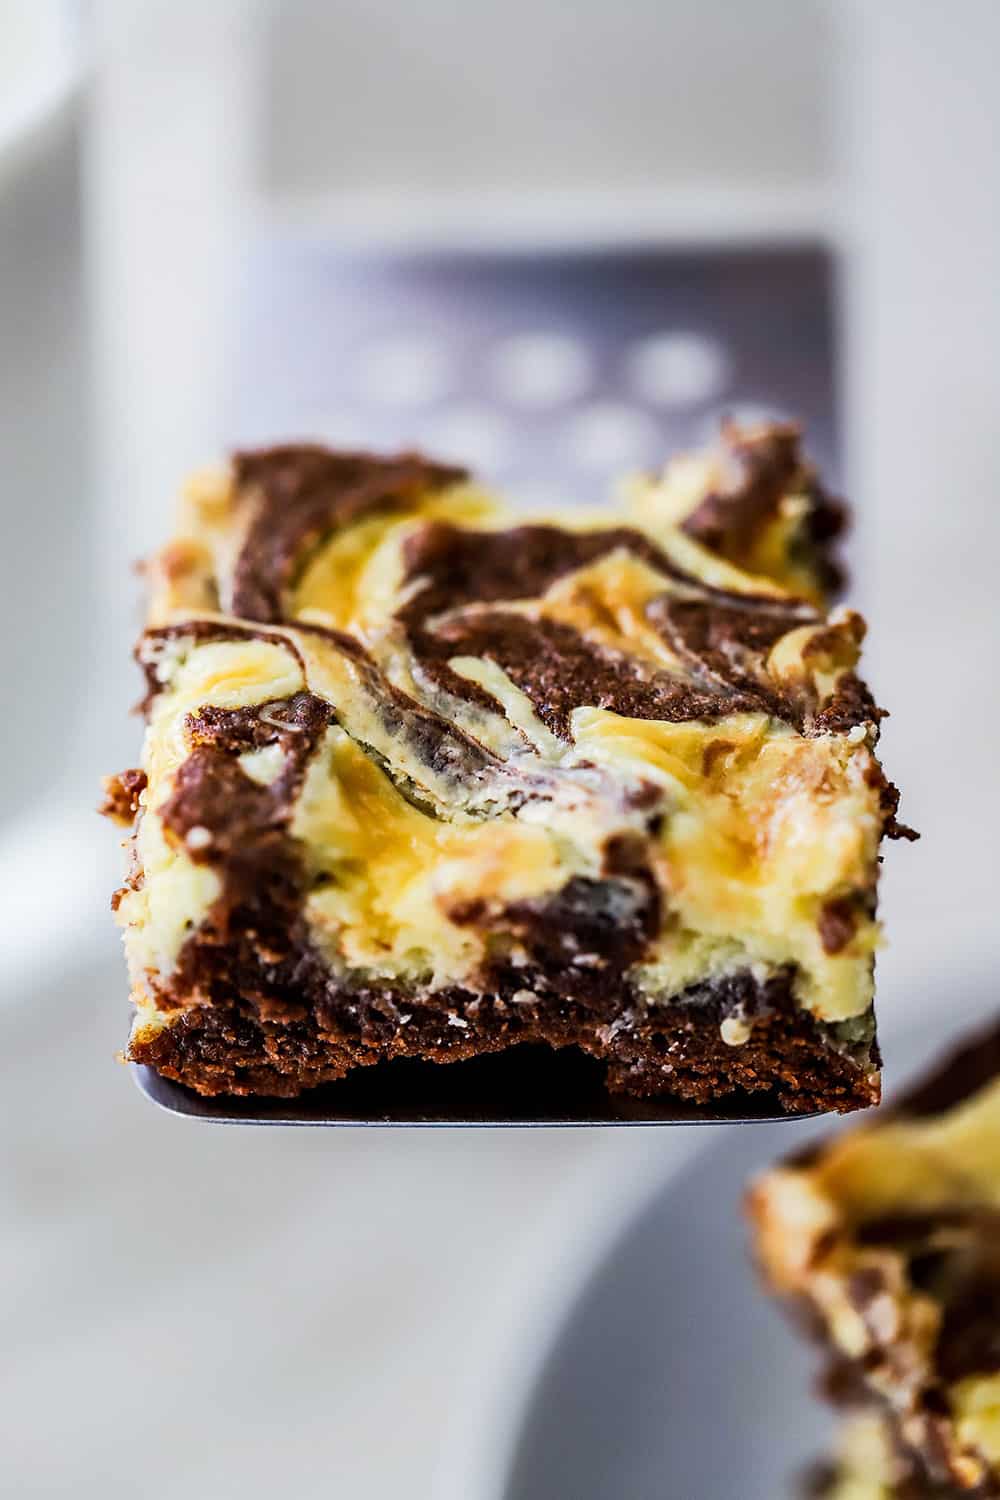 A chocolate and cheese cake brownies being held up on a metal spatula.